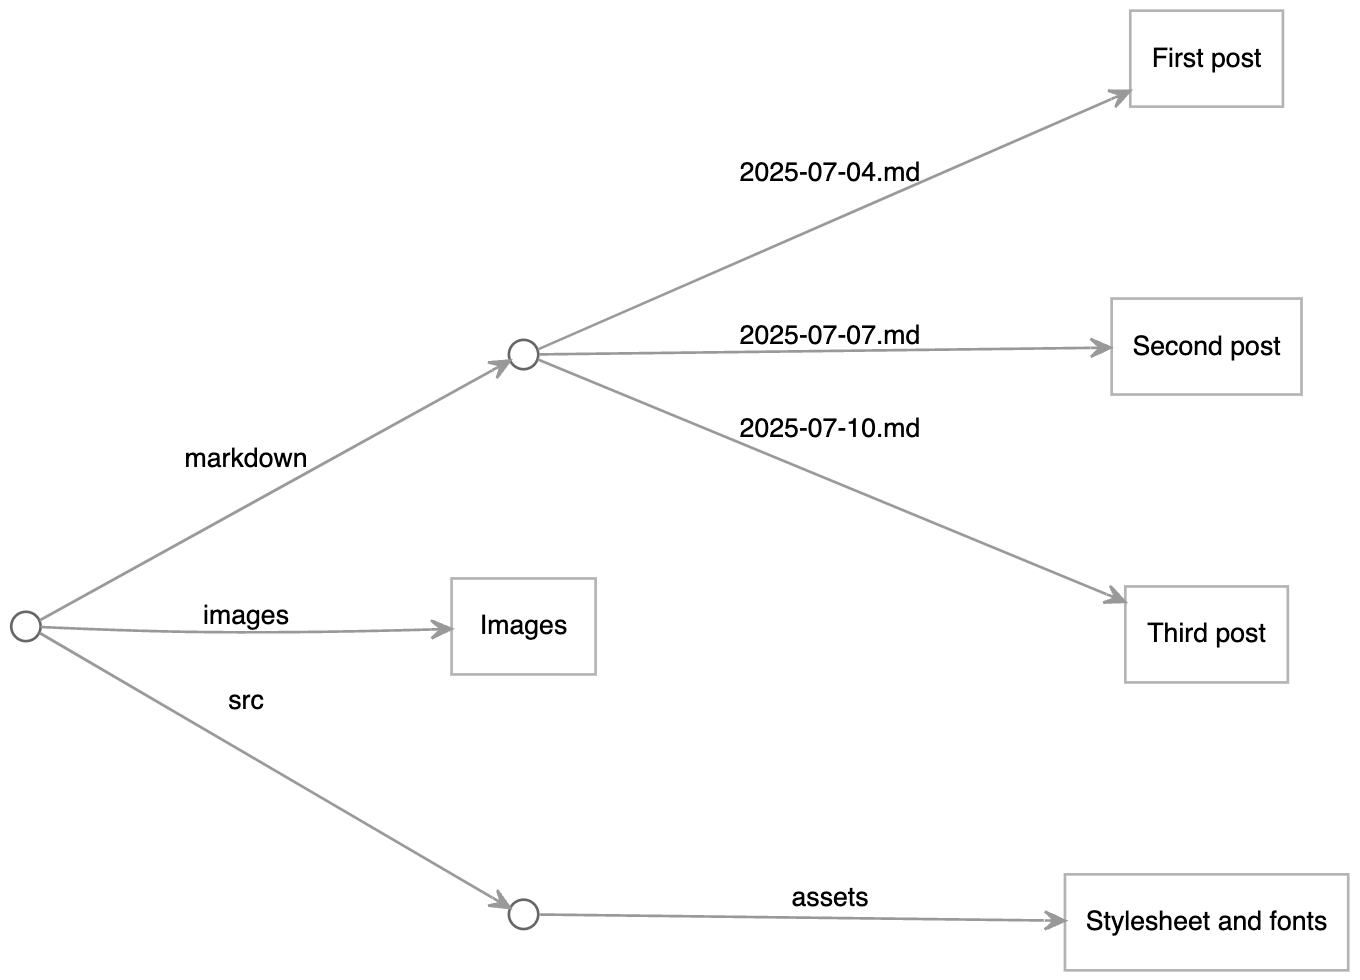 Tree diagram of staring point with assets, images, and markdown folders